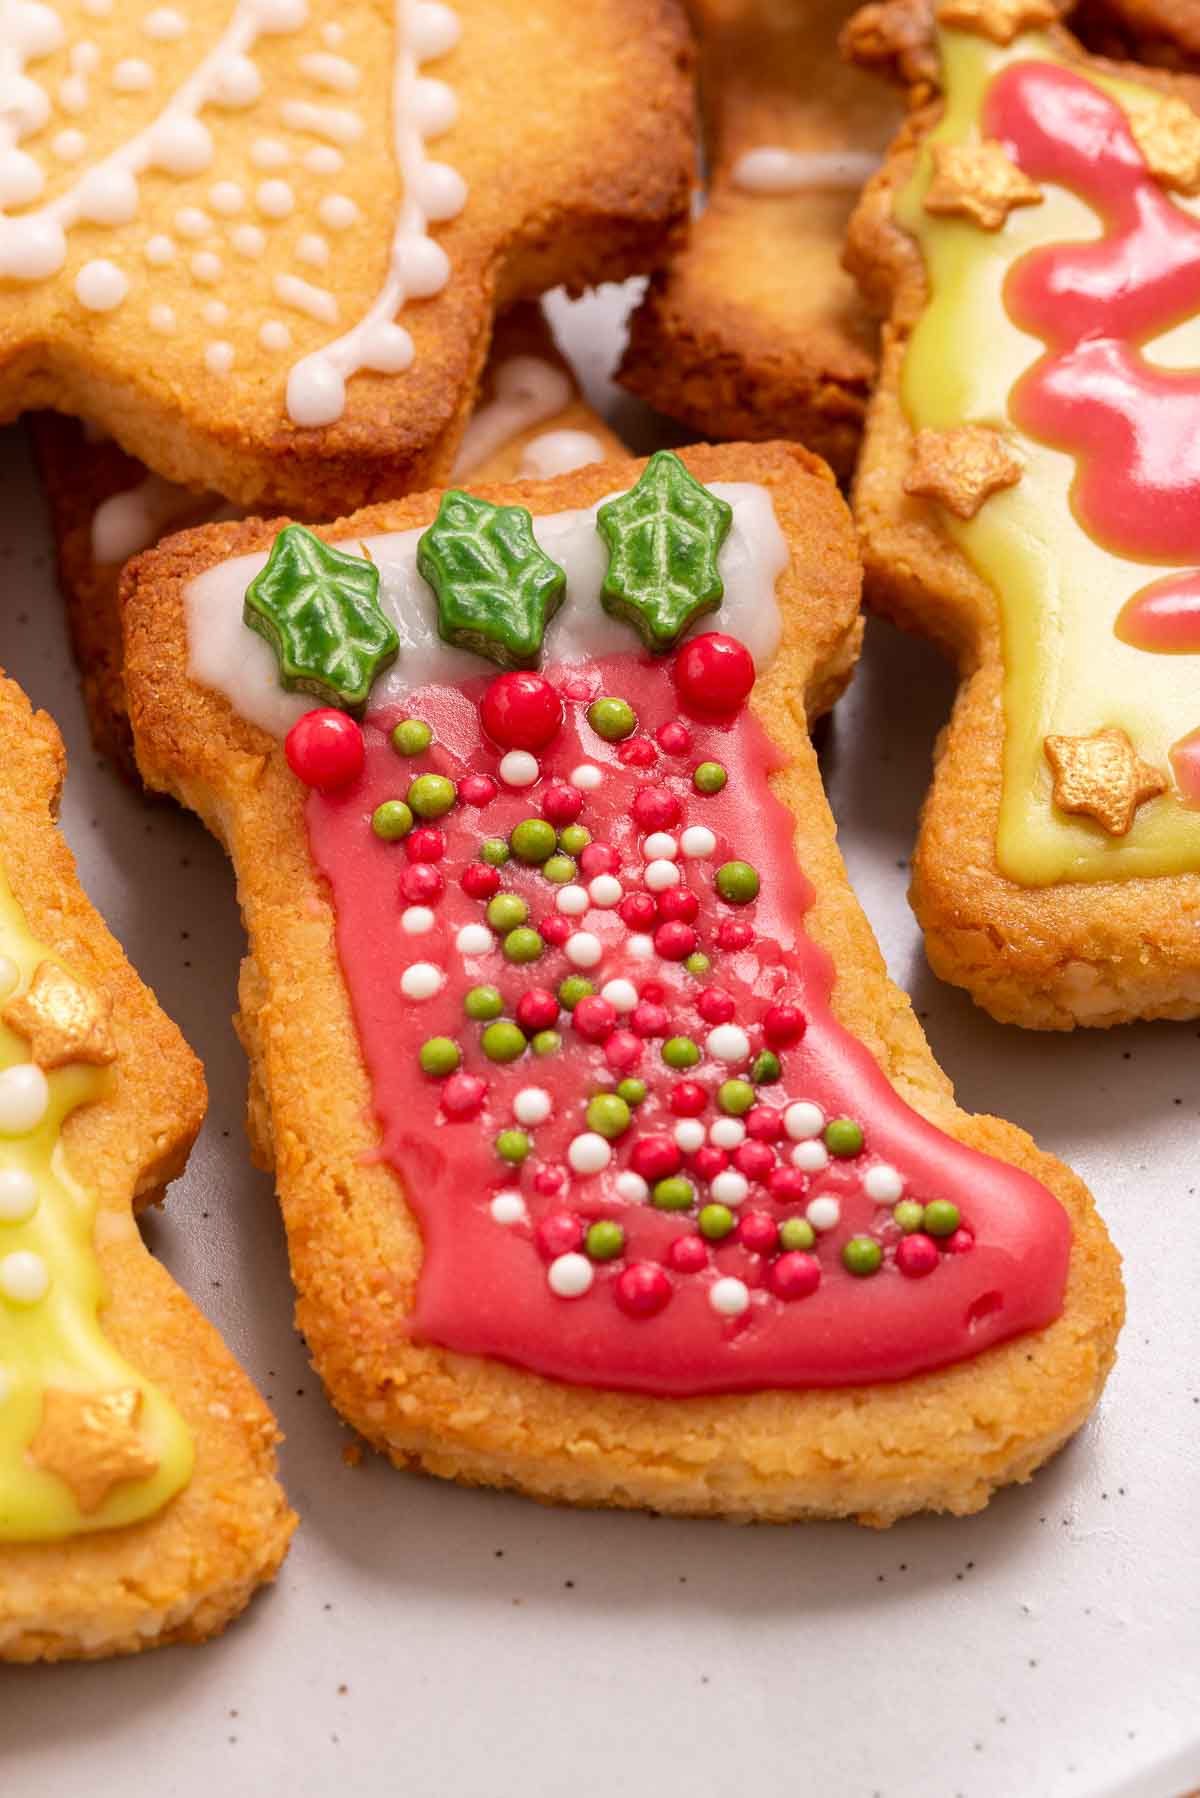 A plate of iced and decorated Christmas cookies.